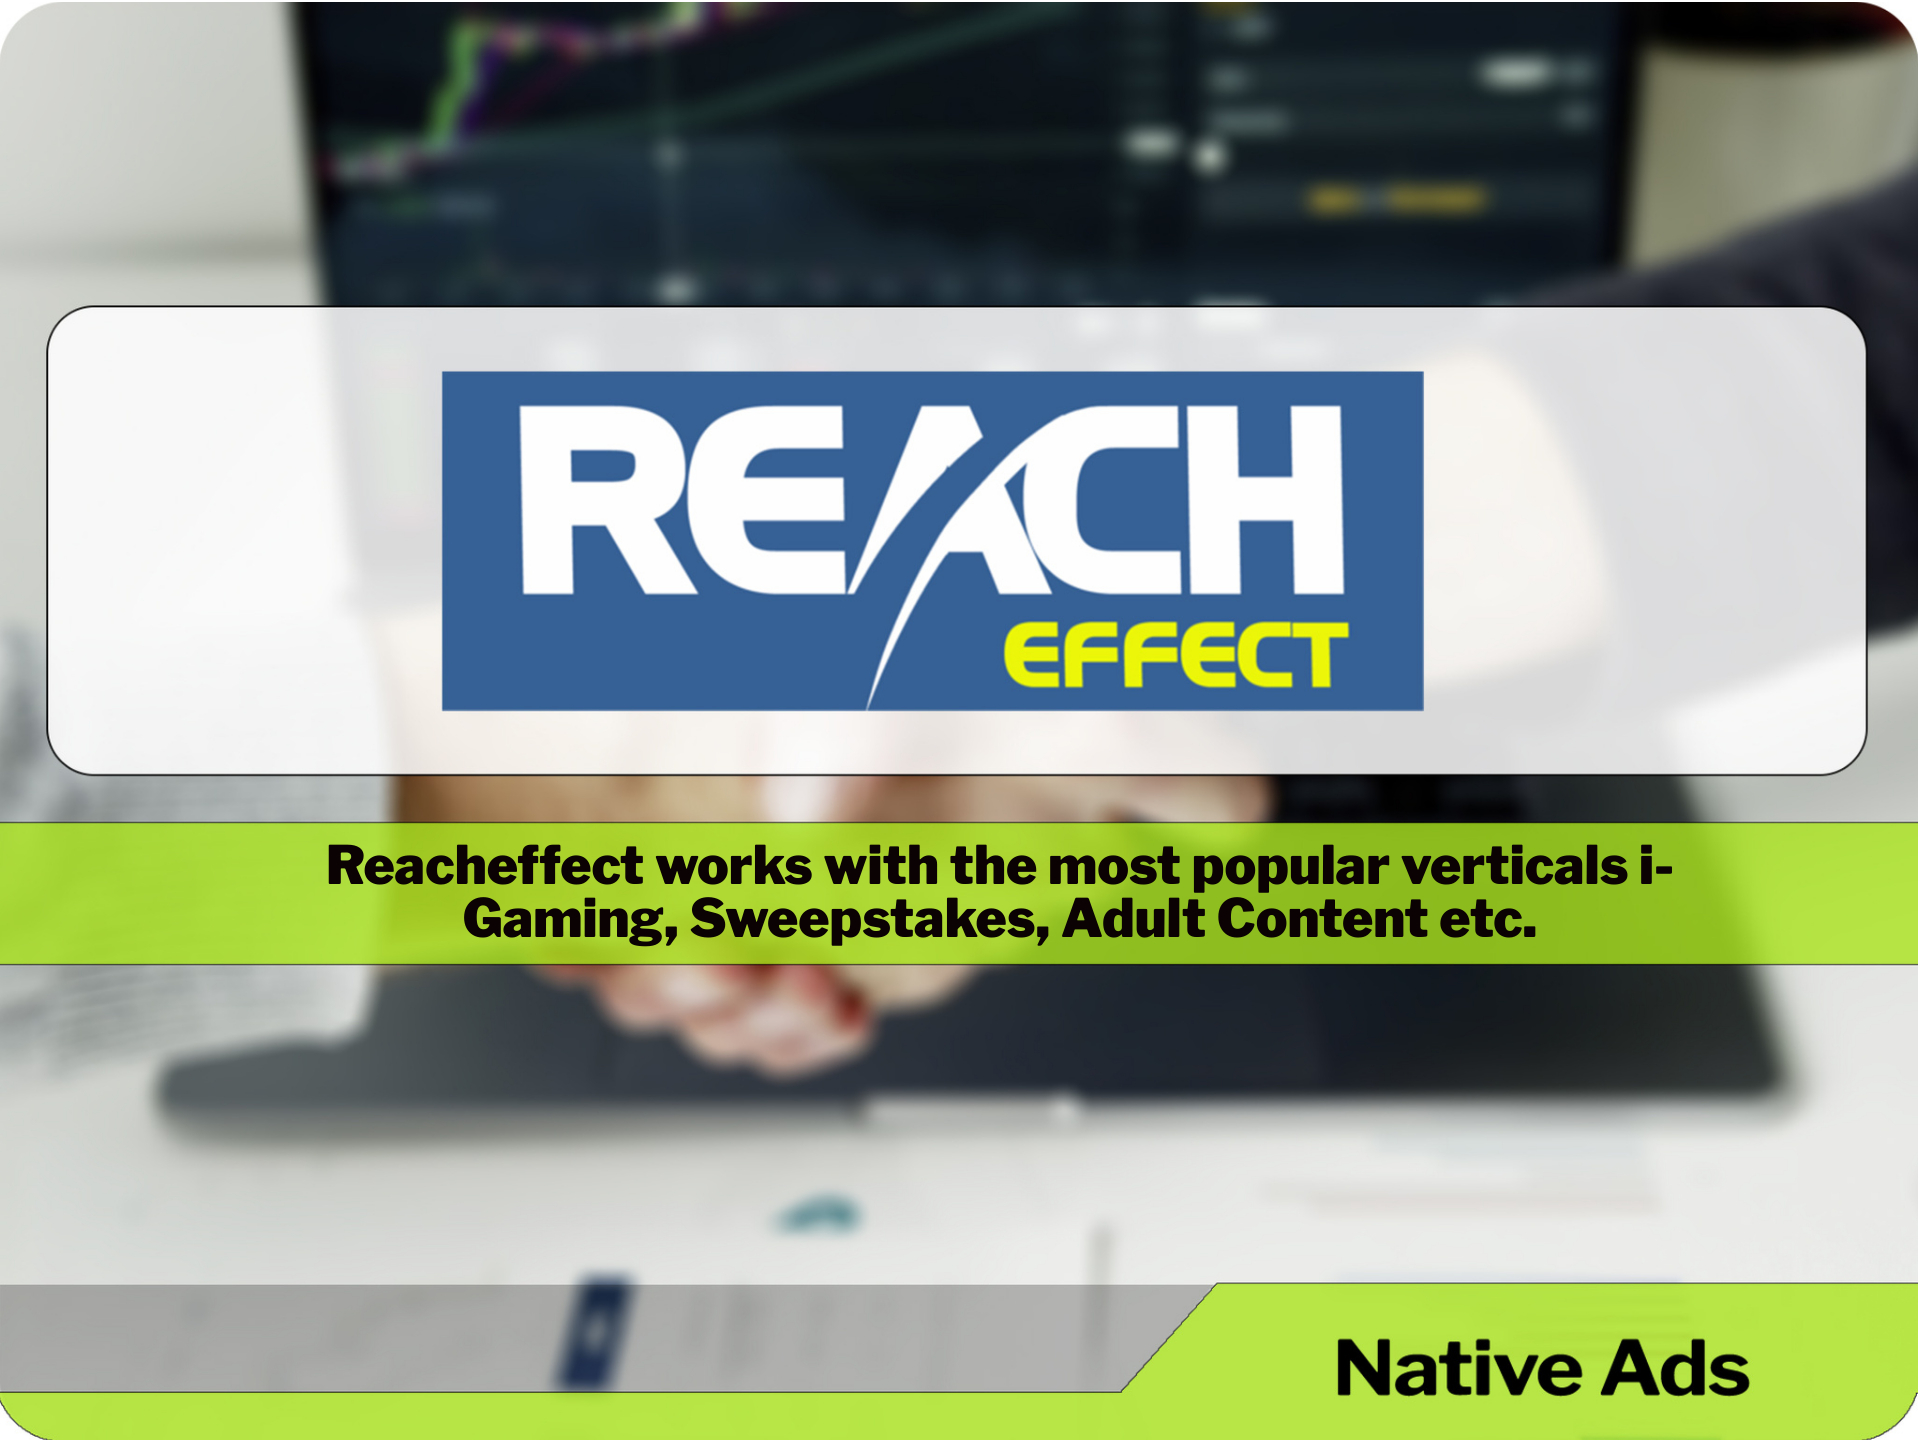 Reacheffect works with the most popular verticals i-Gaming, Sweepstakes, Adult Content etc.